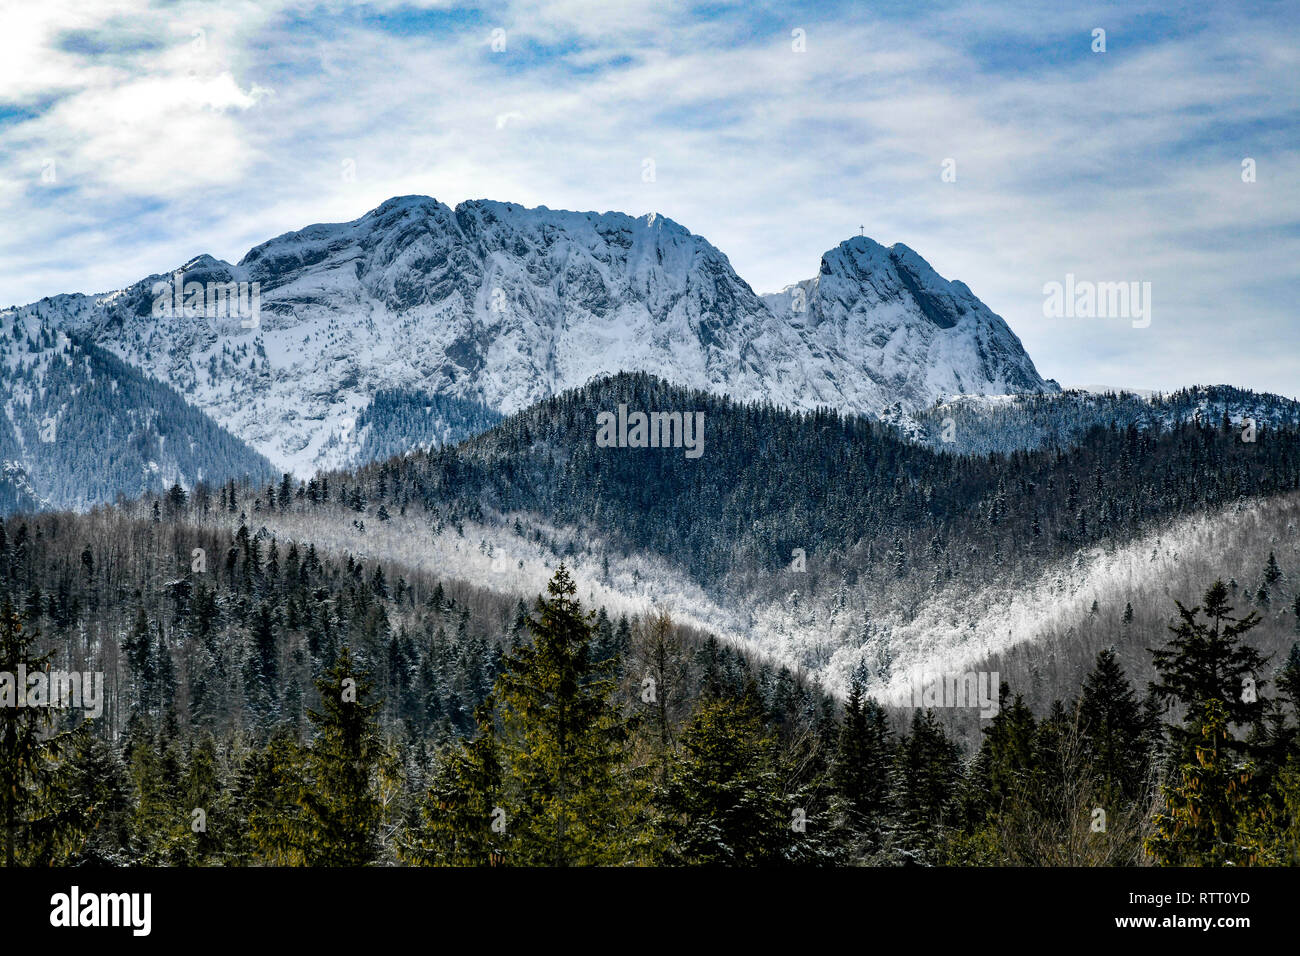 Winter in mountains. The picture was taken in Zakopane (Poland) in February 2019. Mount Giewont. Stock Photo